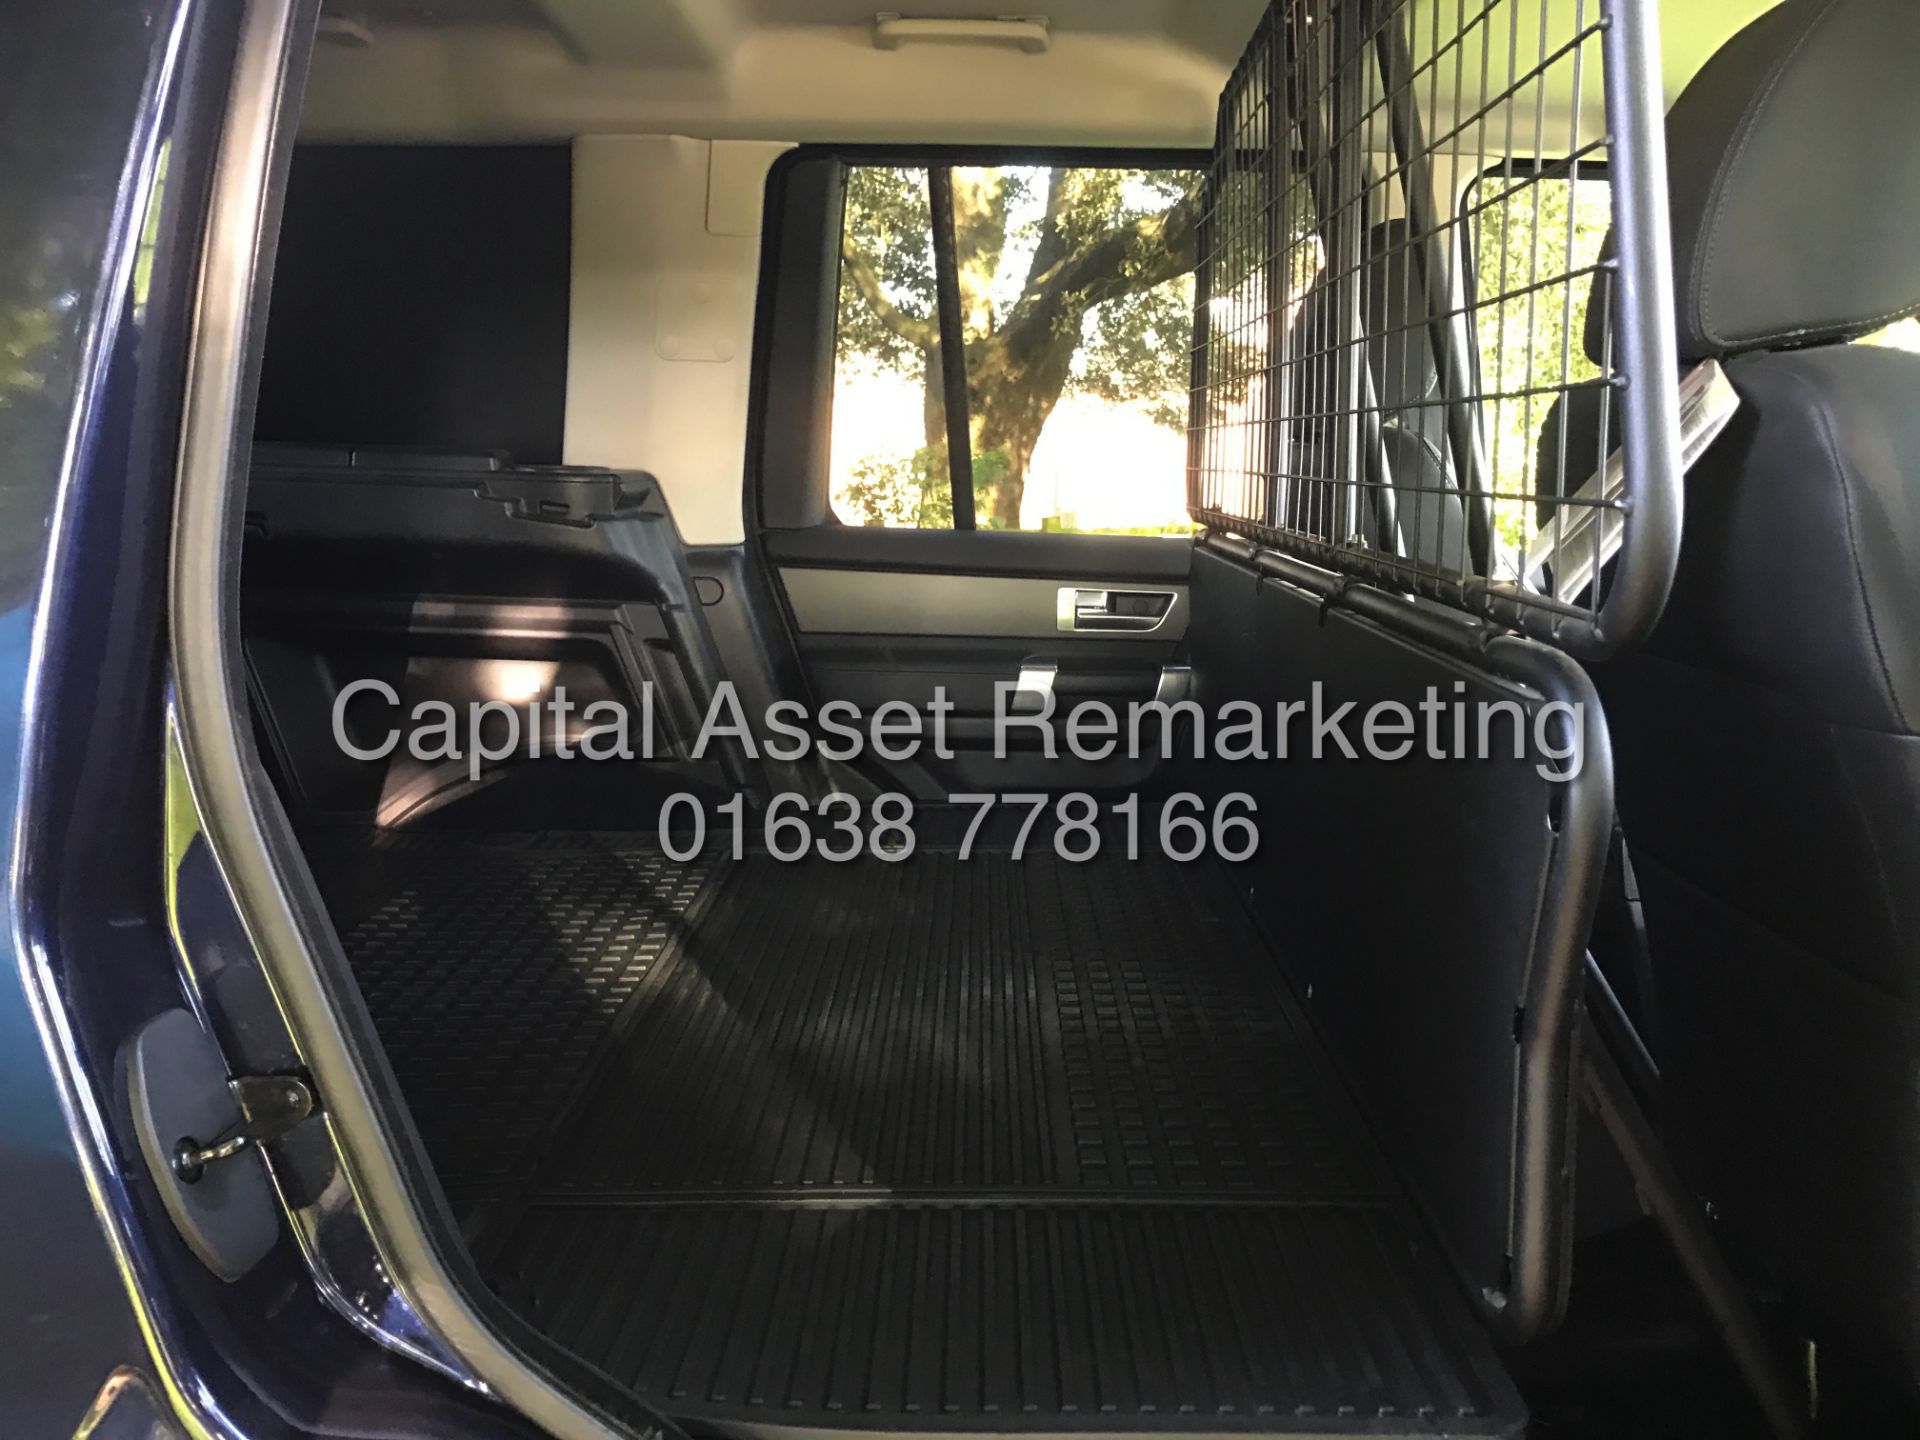 (On Sale) LAND ROVER DISCOVERY 4 'XS EDITION' *COMMERCIAL* (2015) '3.0 SDV6 - AUTO-LEATHER-SAT NAV' - Image 30 of 32